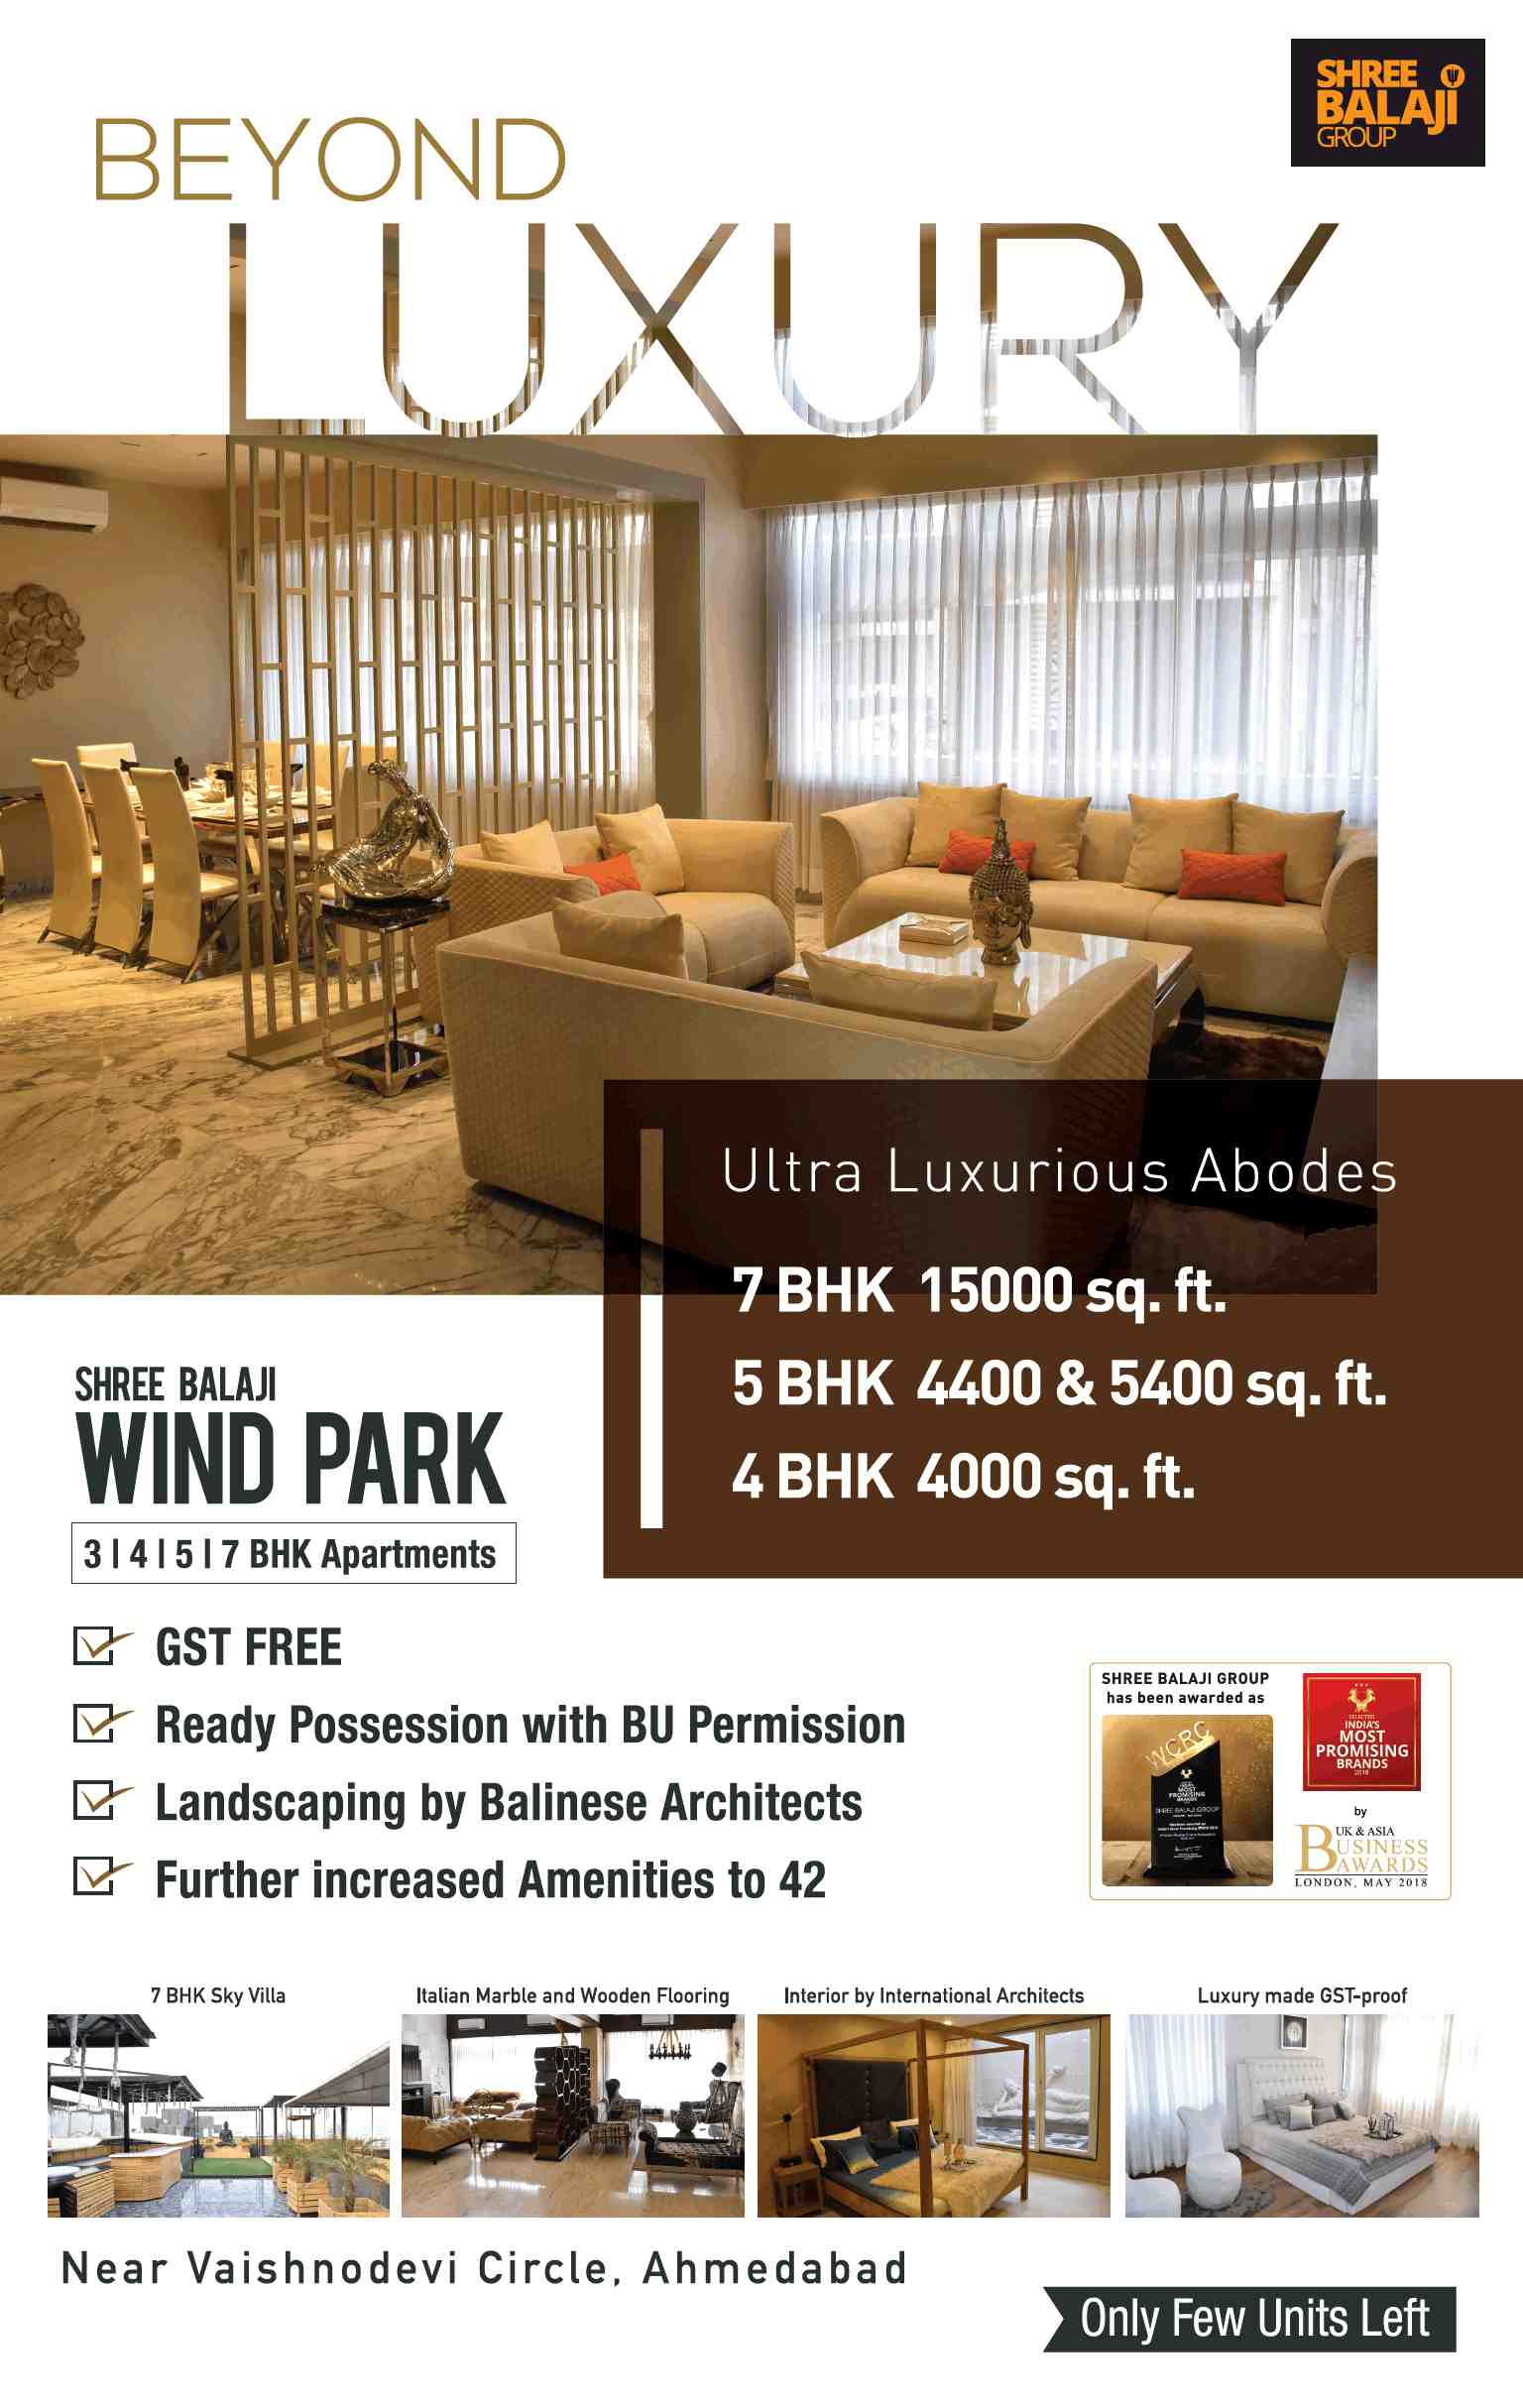 Book ultra luxurious abodes at Shree Balaji Wind Park in Ahmedabad Update